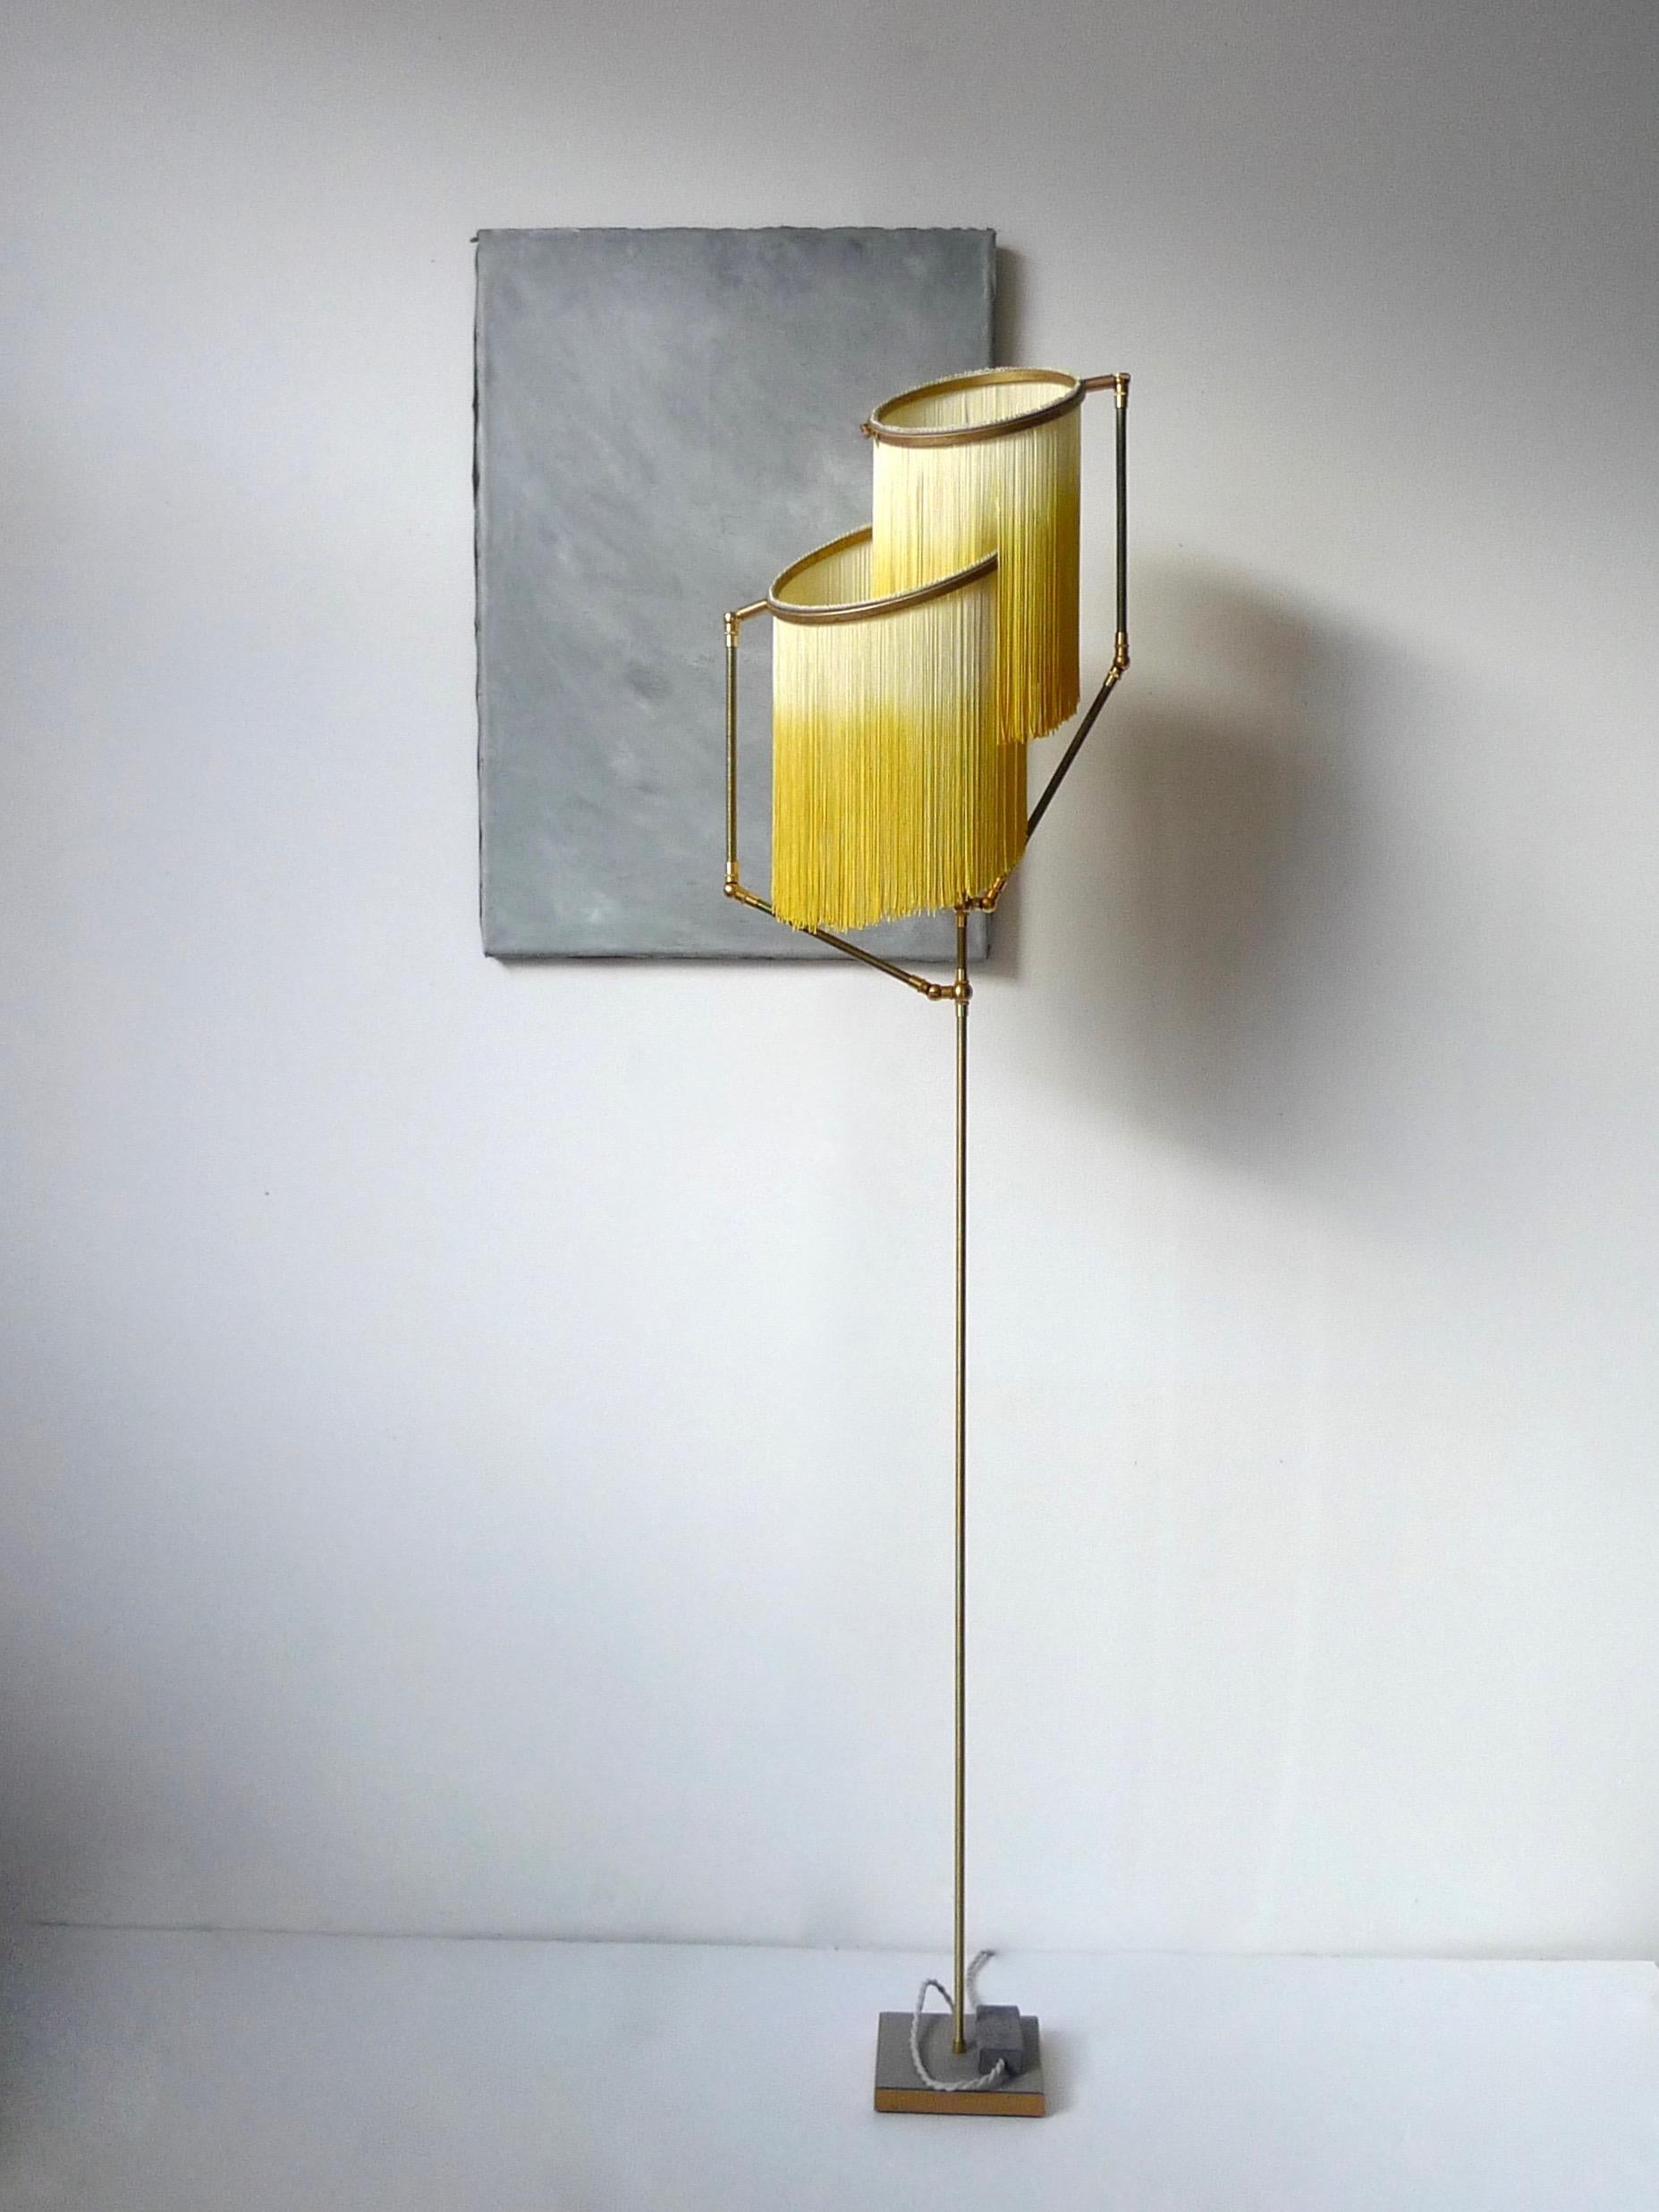 Yellow Charme floor lamp, Sander Bottinga

Dimensions: H 153 x W 38 x D 25 cm
Handmade in brass, leather, wood and dip dyed colored Fringes in viscose.
The movable arms makes it possible to move the circles with fringes in different